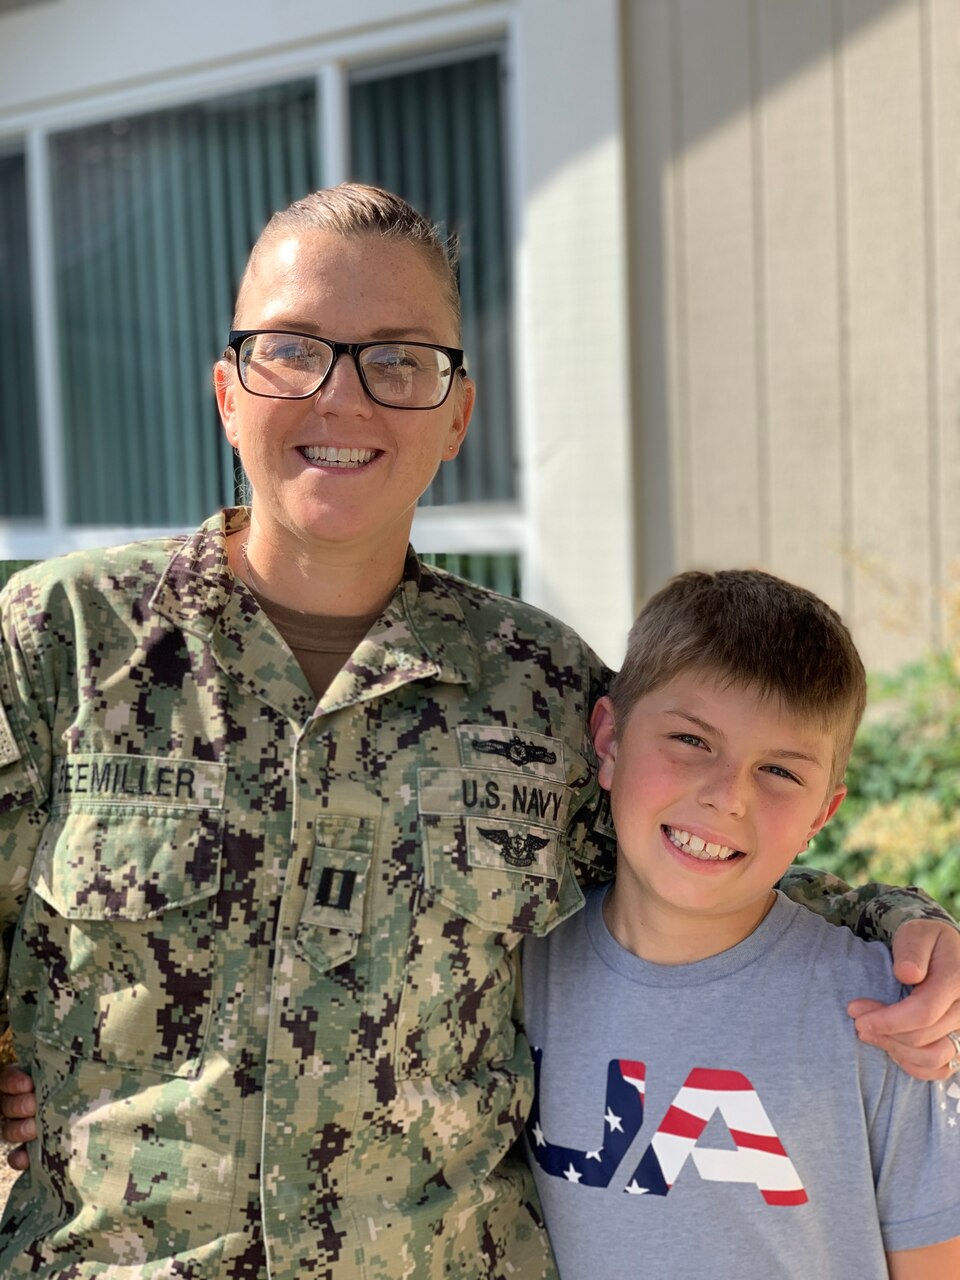 Breast cancer survivor, Lt. Sarah Beemiller and son pose while in uniform.